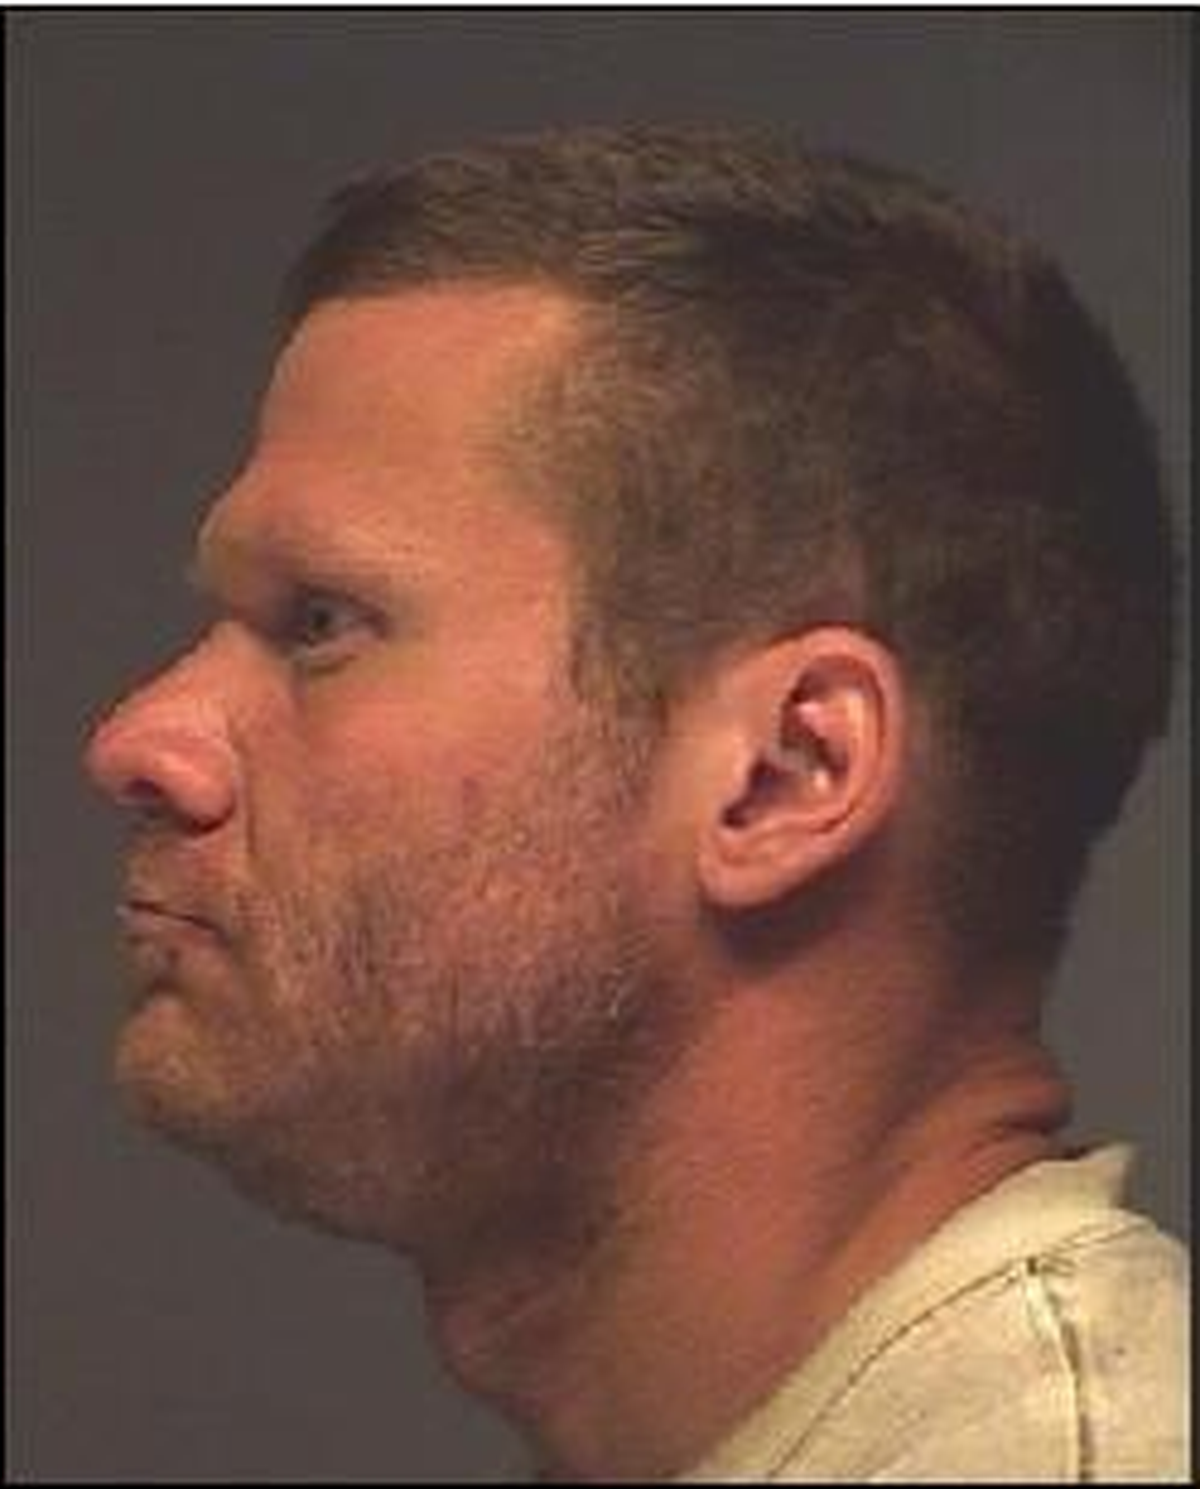 Dustin P. Leeds is accused of escaping Eastern State Hospital on Thursday, June 8, 2017. (Courtesy Spokane County Sheriff’s Office)